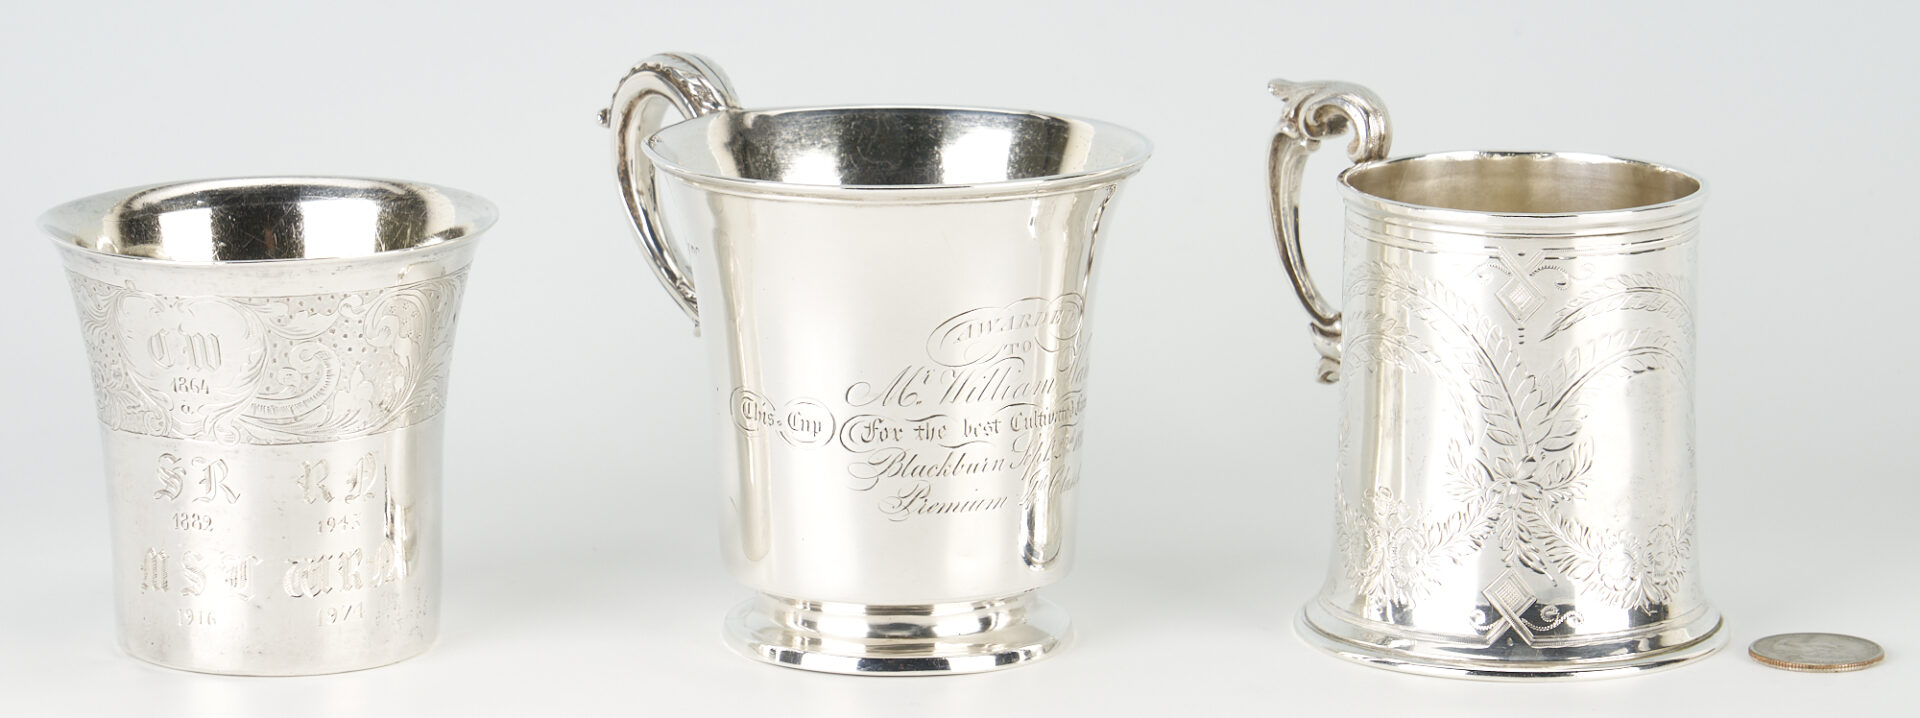 Lot 45: 3 English Sterling Silver Agricultural presentation cups